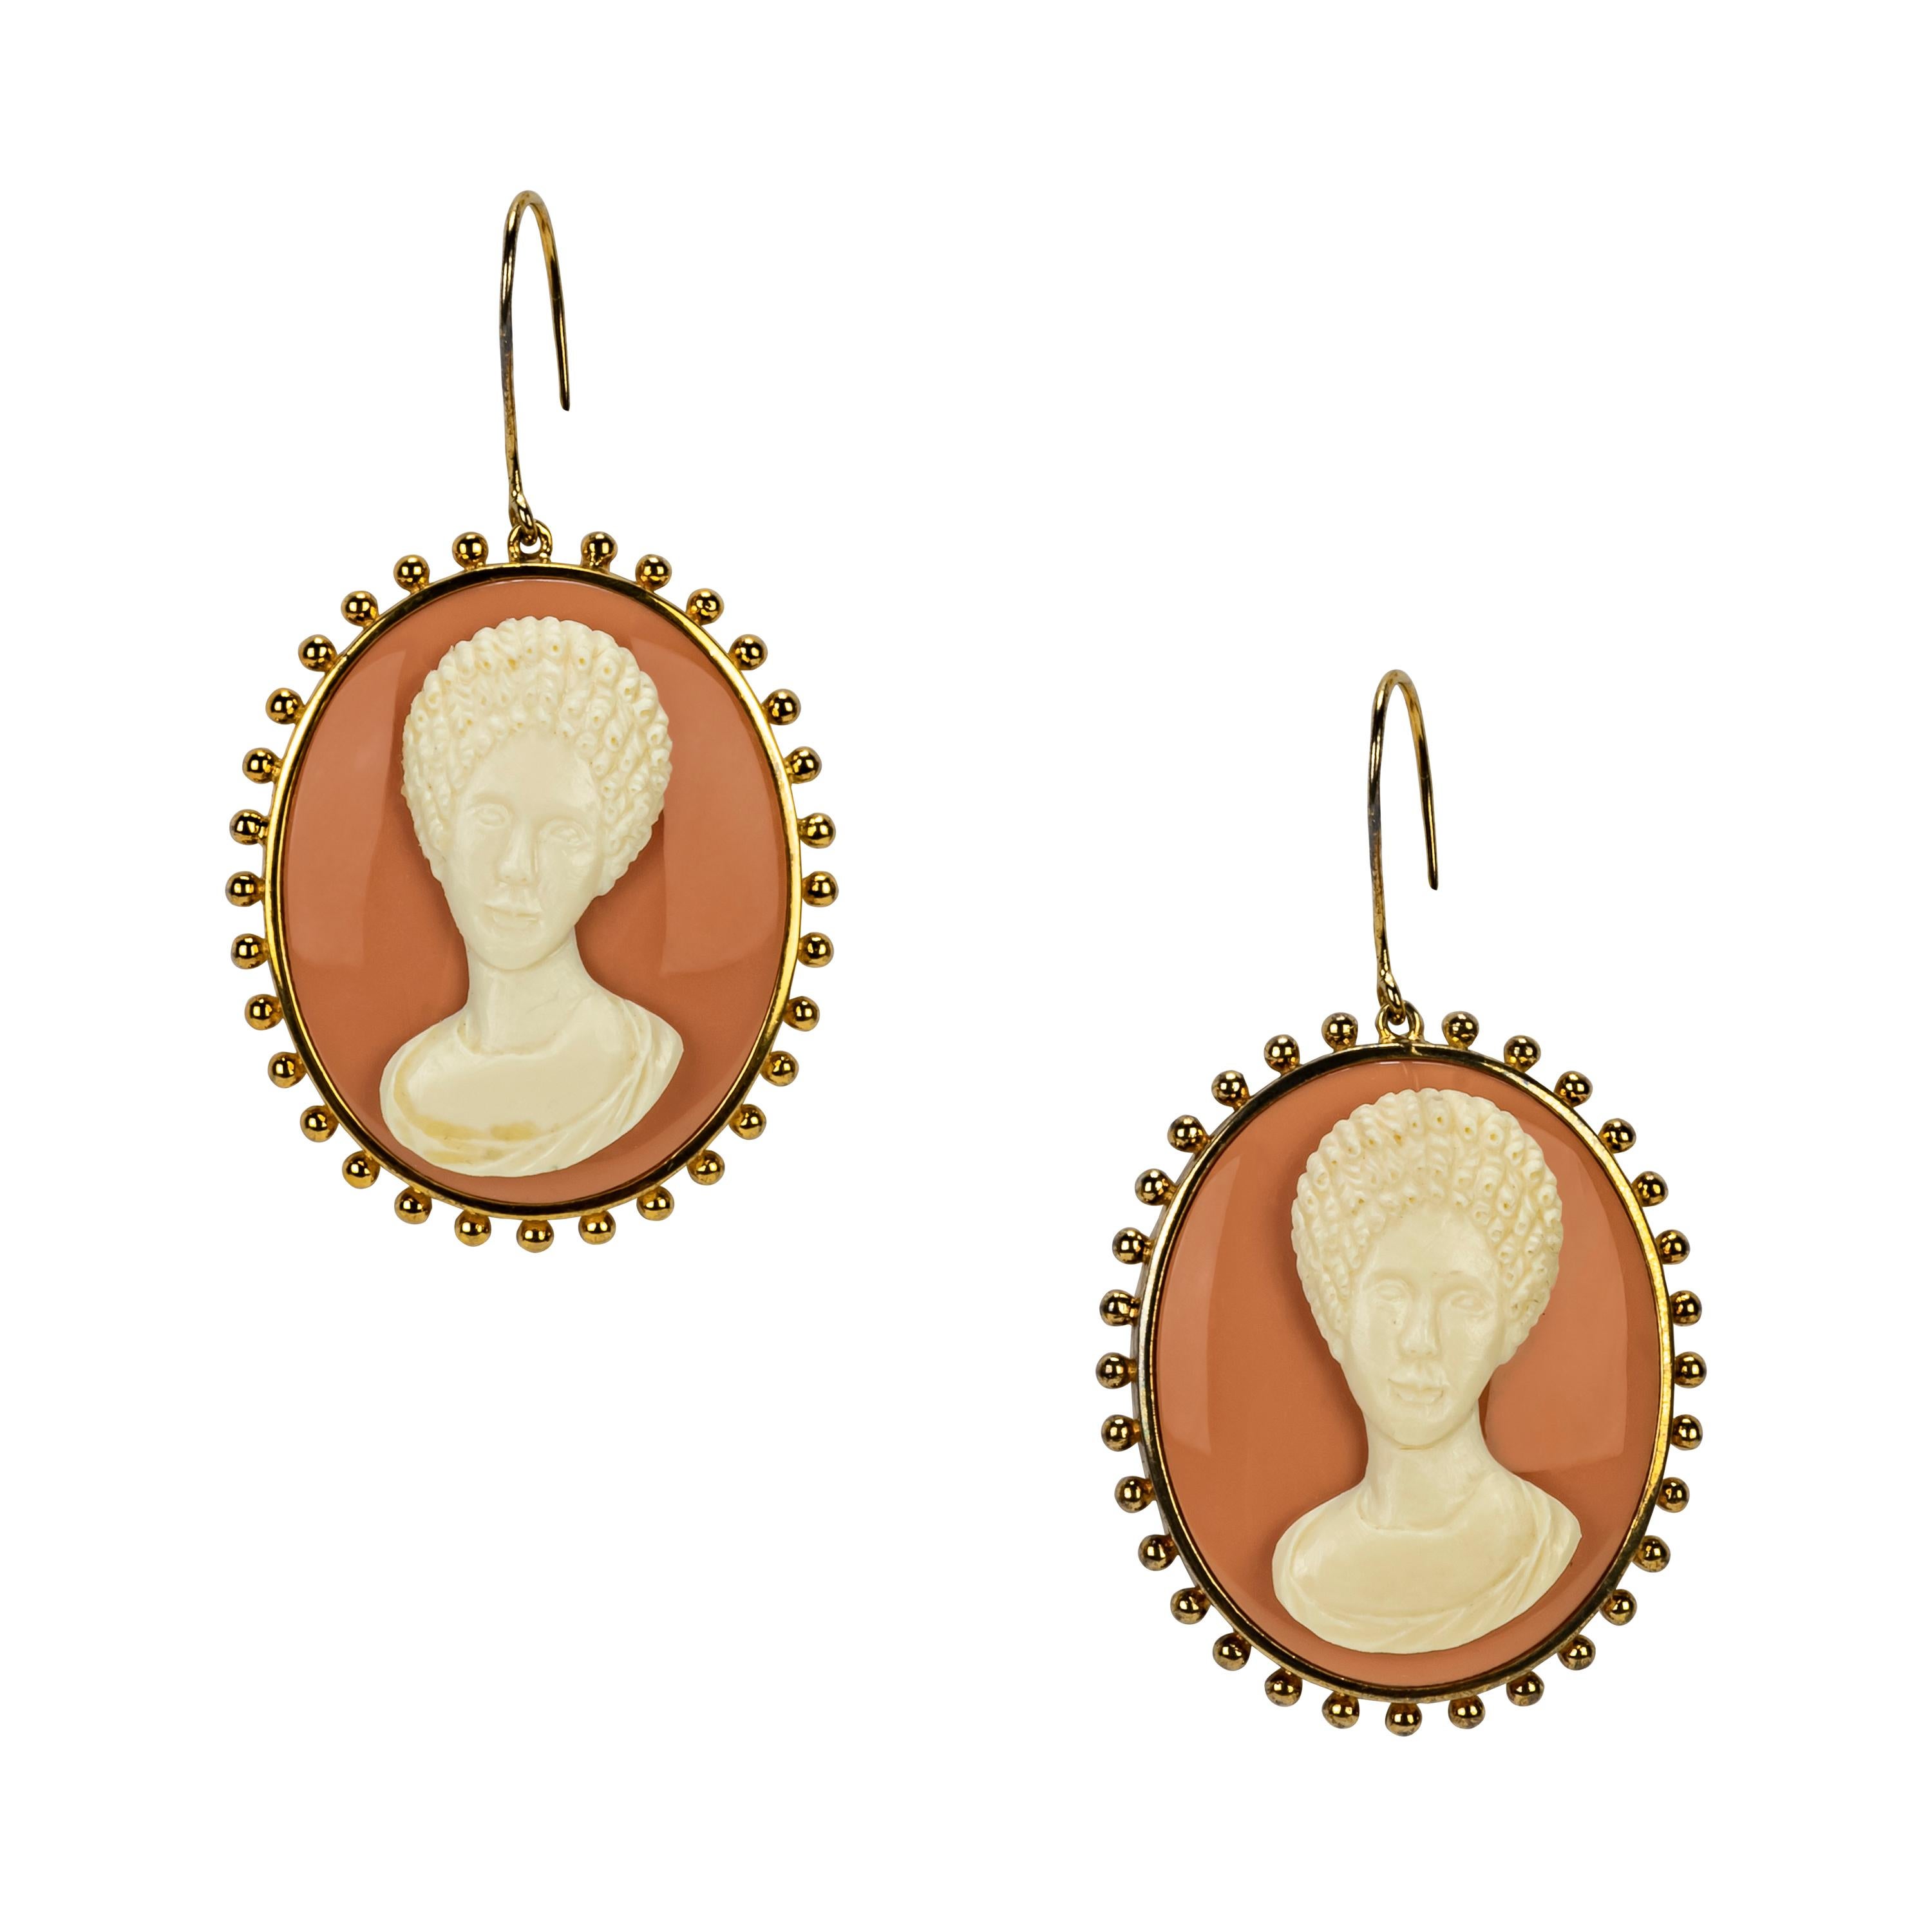 Miriam Salat Cameo Earrings
Starling Silver and Gold plating. 
Ivory / Cream color Resin 
Salmon color Resin
Typical of the Napoli cameo work in Italy. 
Incredible attention to carving detail. 
Elegant Italian style earrings. 
Hook closures.
Gold